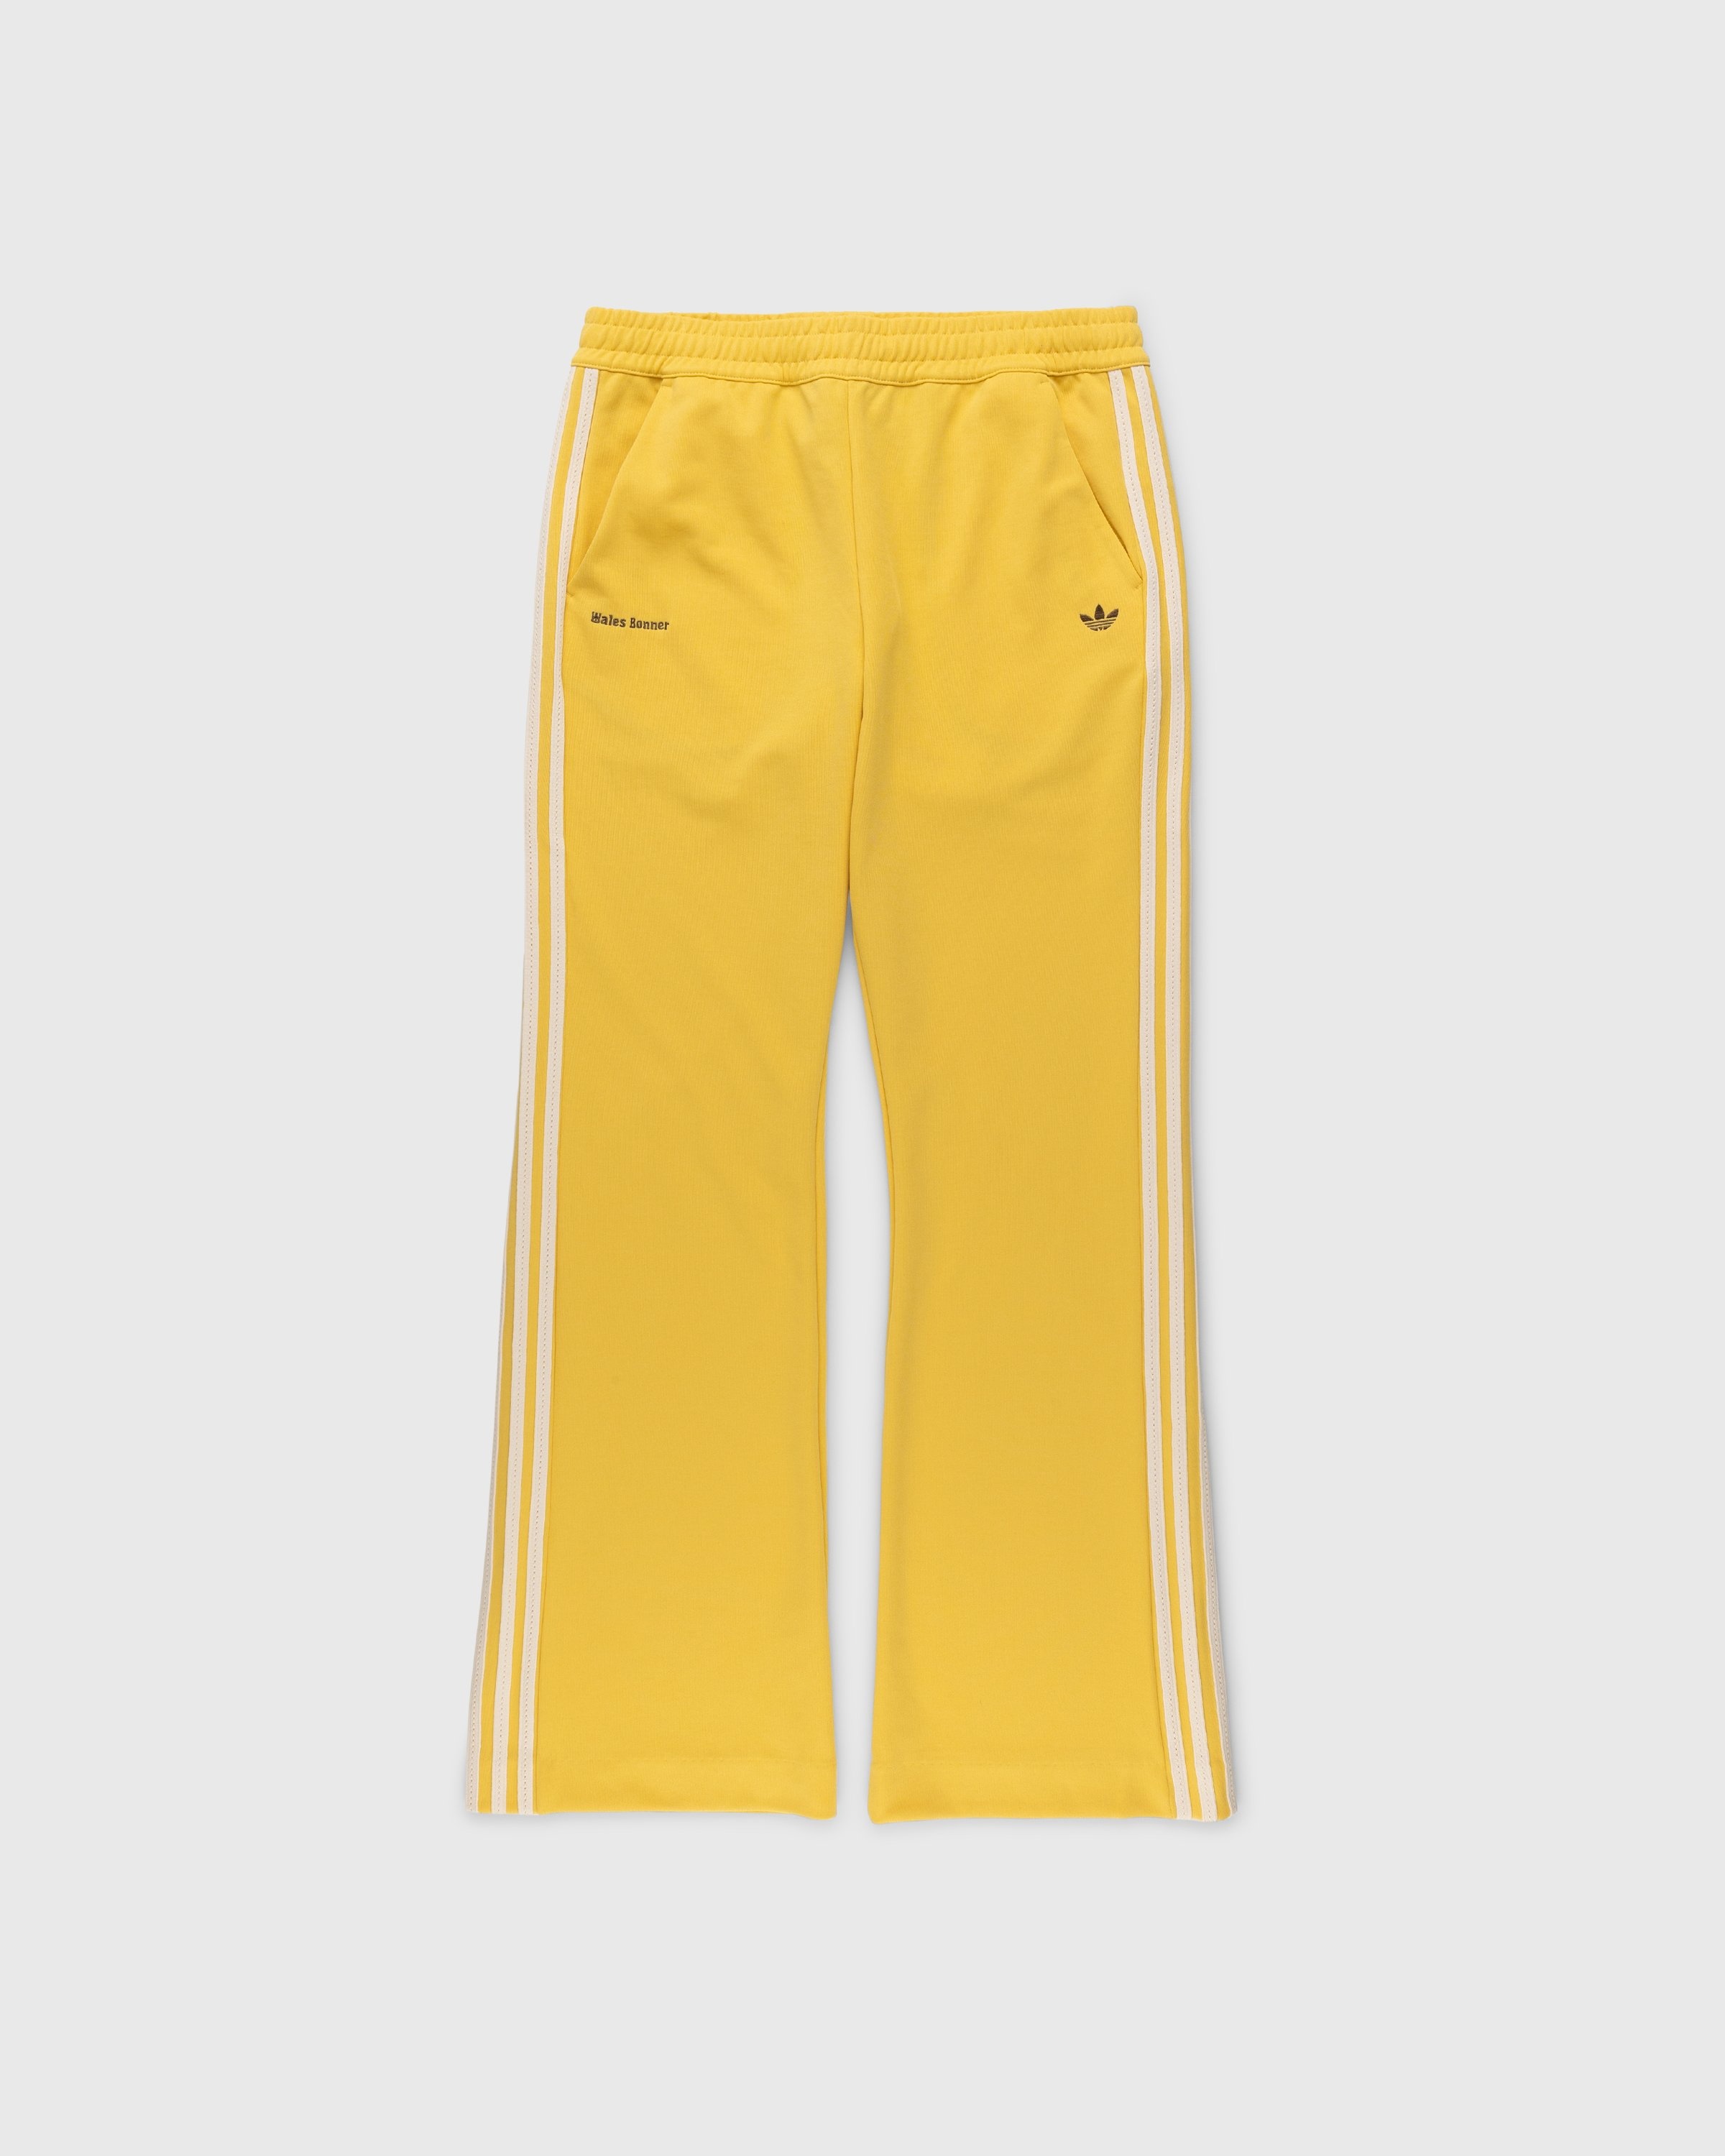 Adidas x Wales Bonner – WB Track Pants St Fade Gold | Highsnobiety